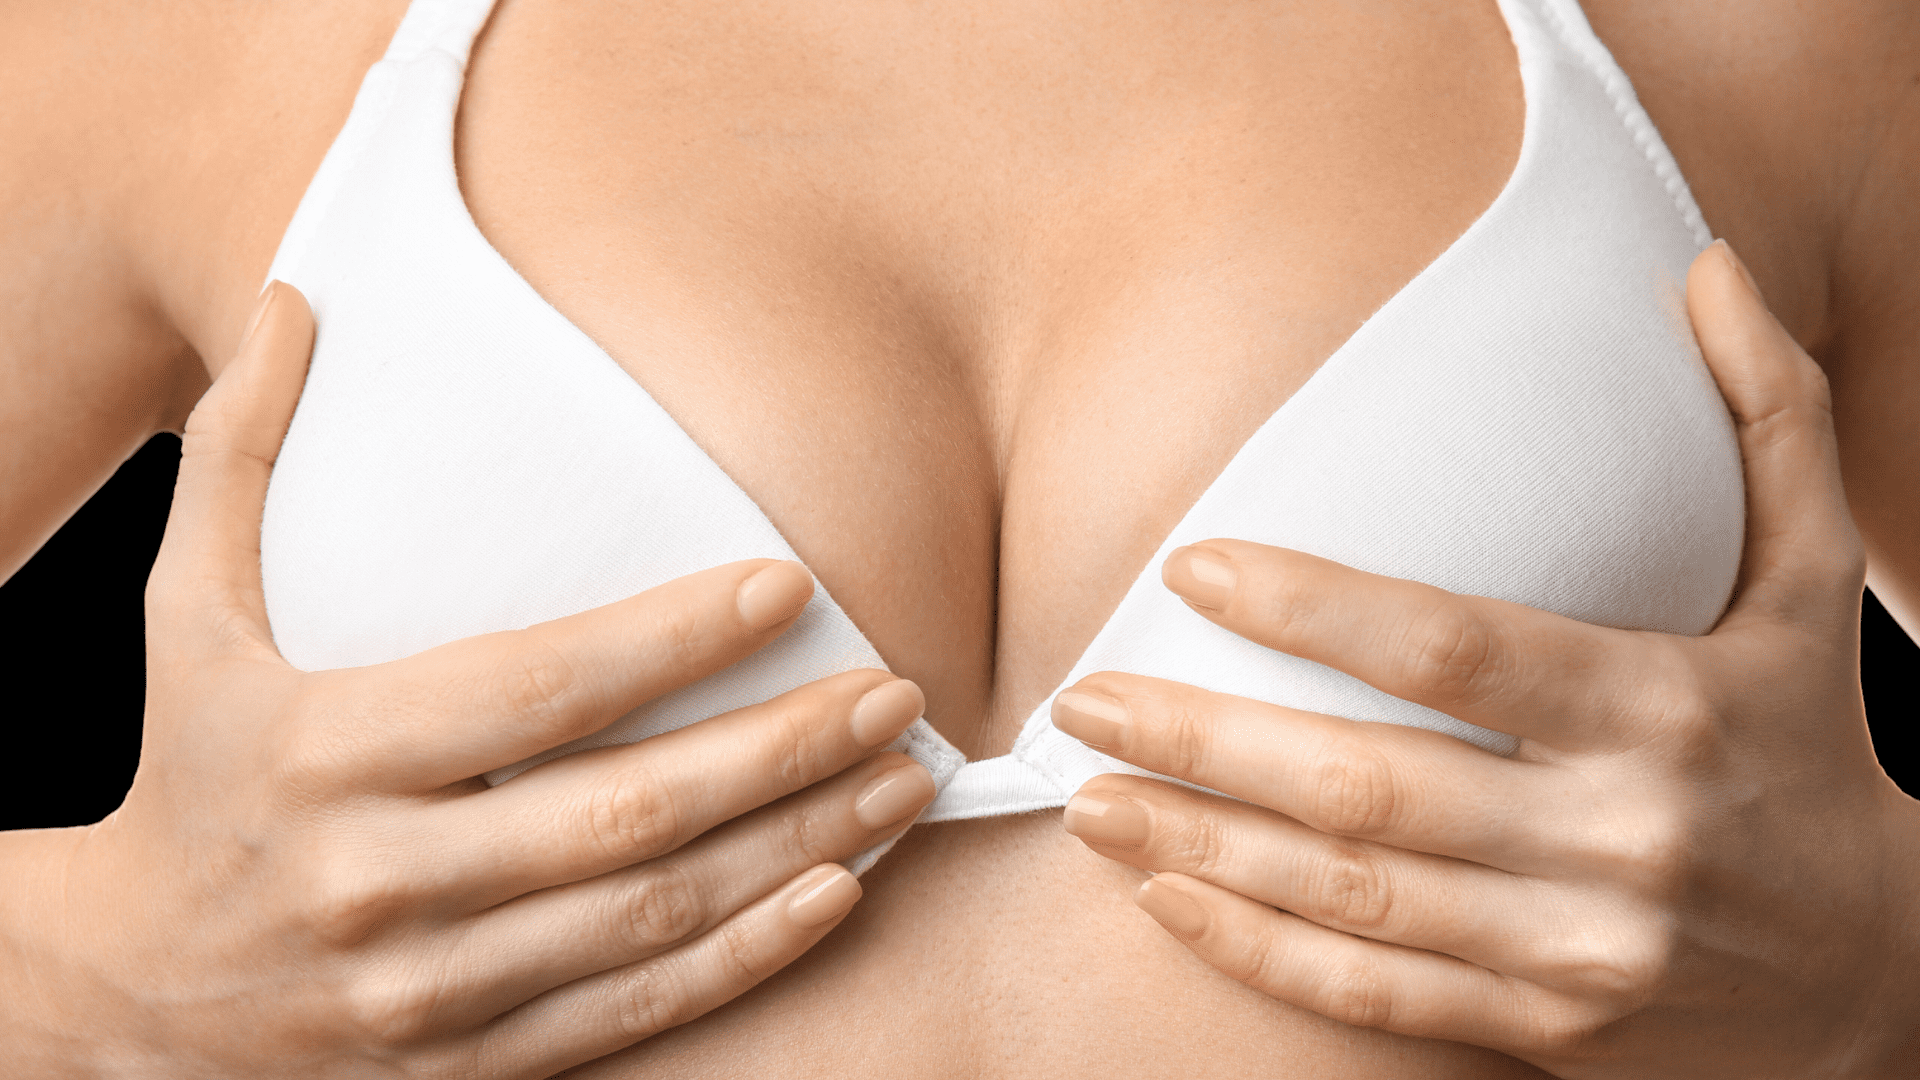 Can I Fix Uneven Breasts Without Implants? + 5 More Questions